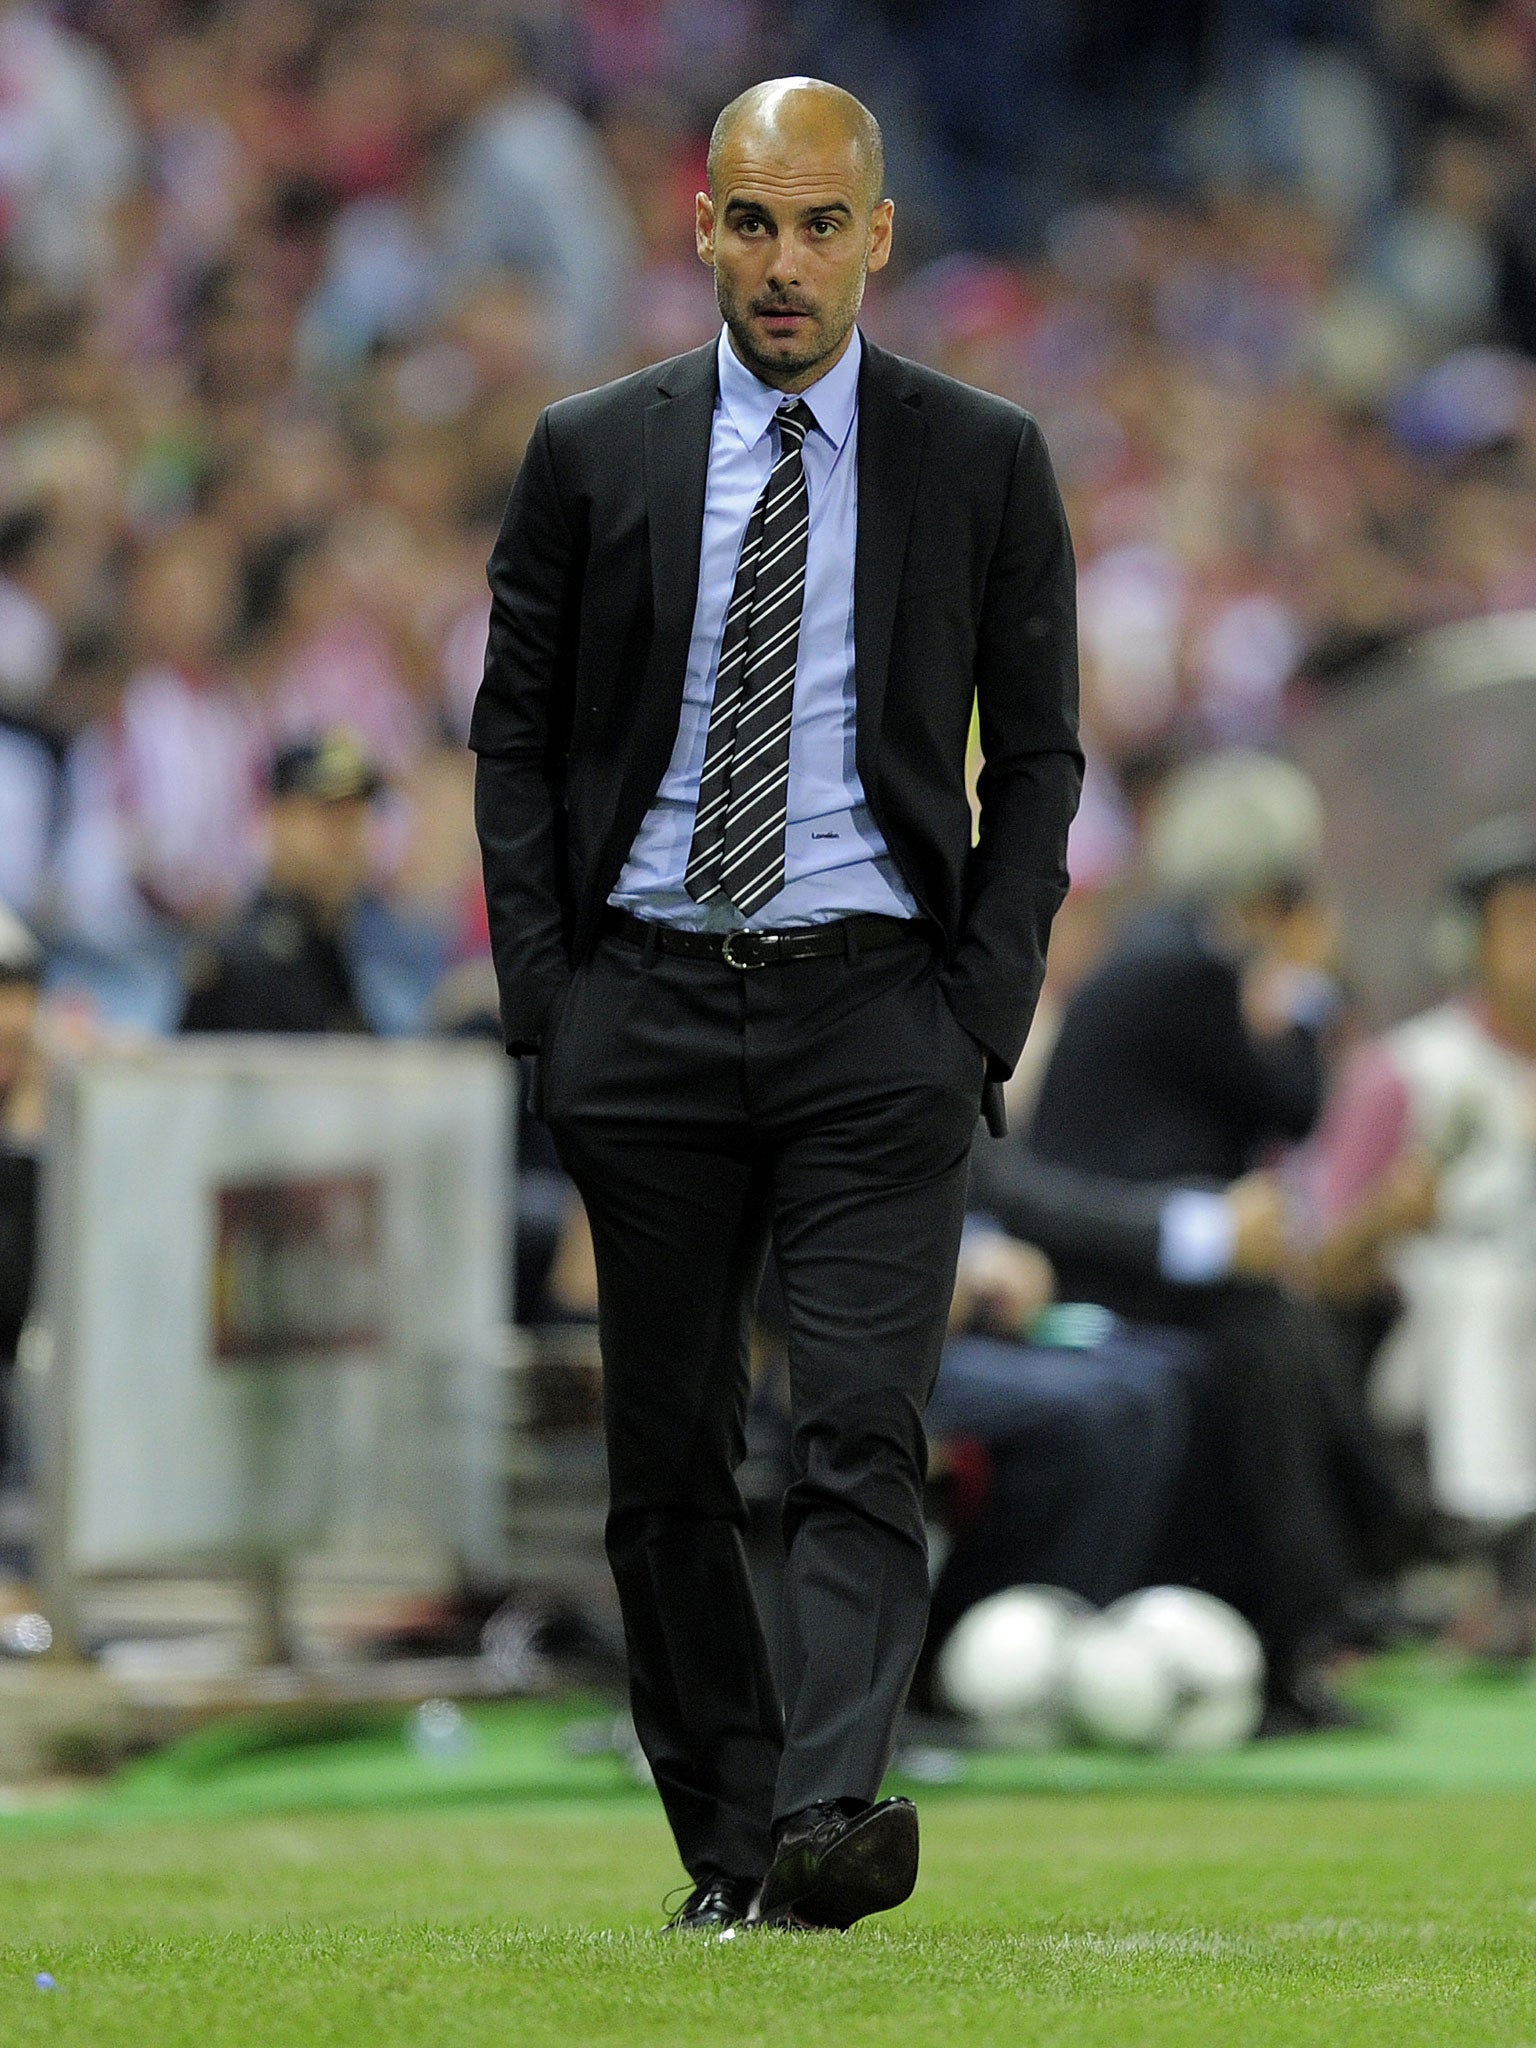 Josep Guardiola, the former Barcelona coach, is taking his entourage with him to Bayern